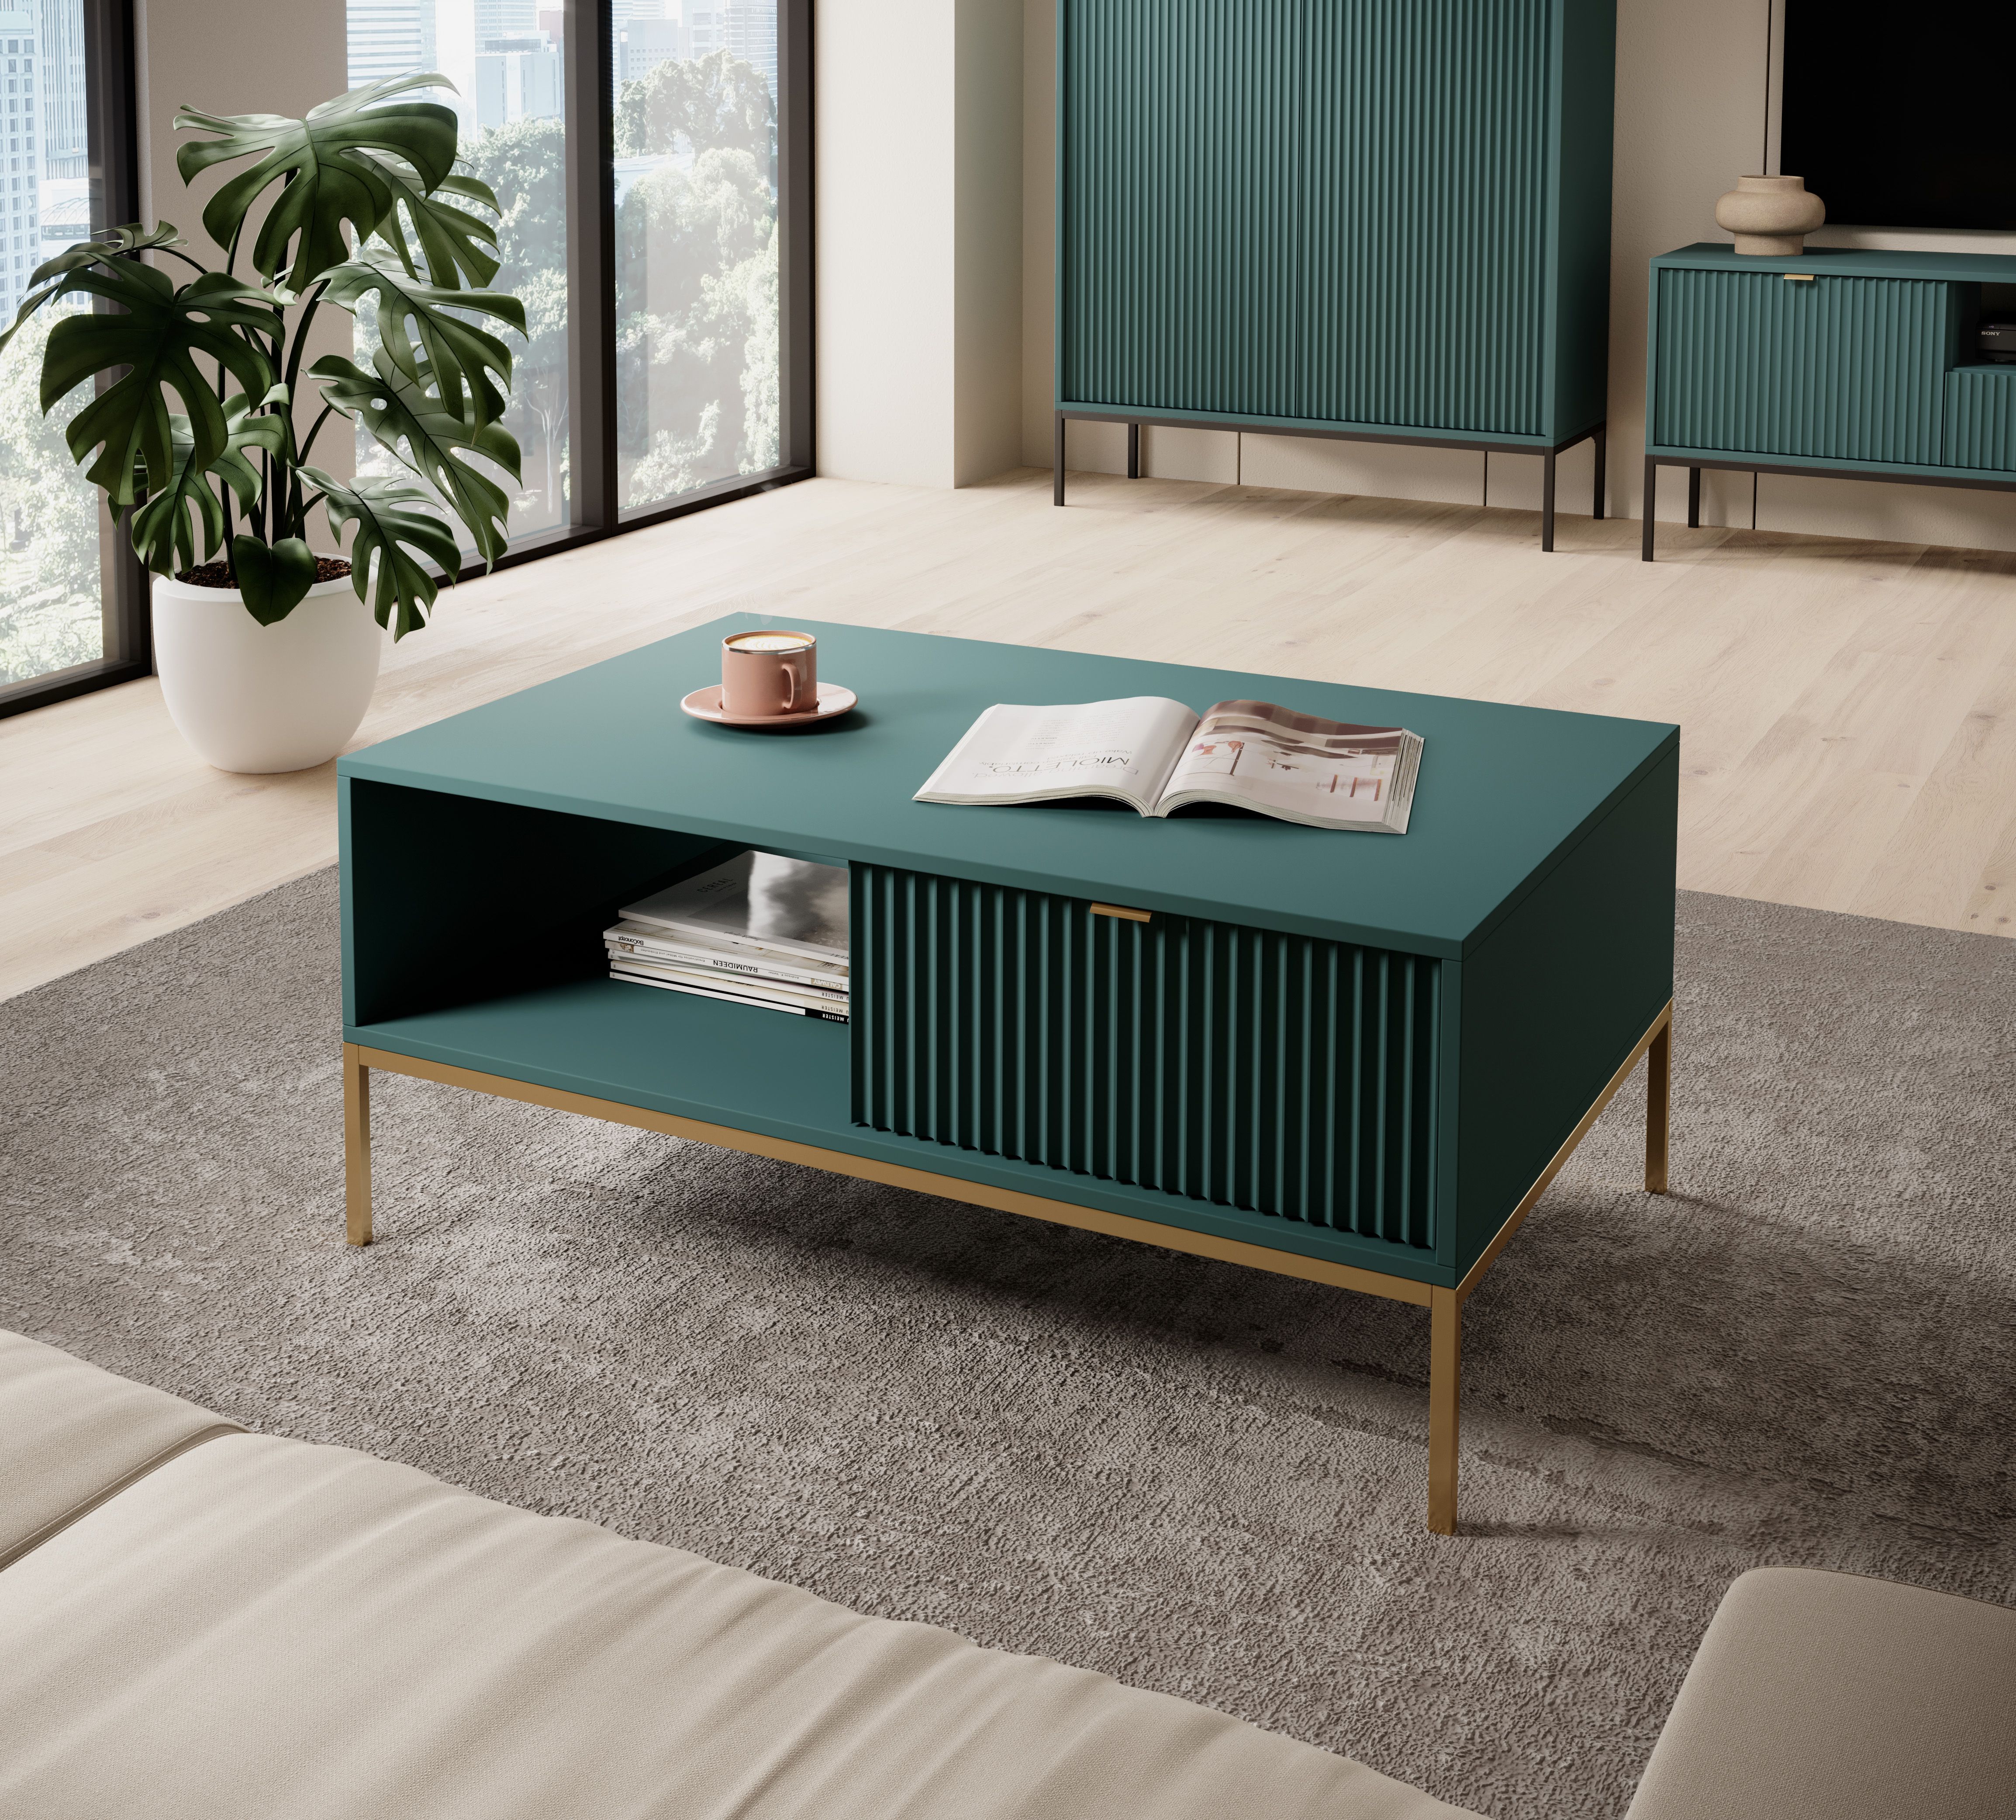 Table basse contemporaine Worthing 09, Couleur : Turquoise / Or - Dimensions : 46 x 104 x 68 cm (H x L x P)